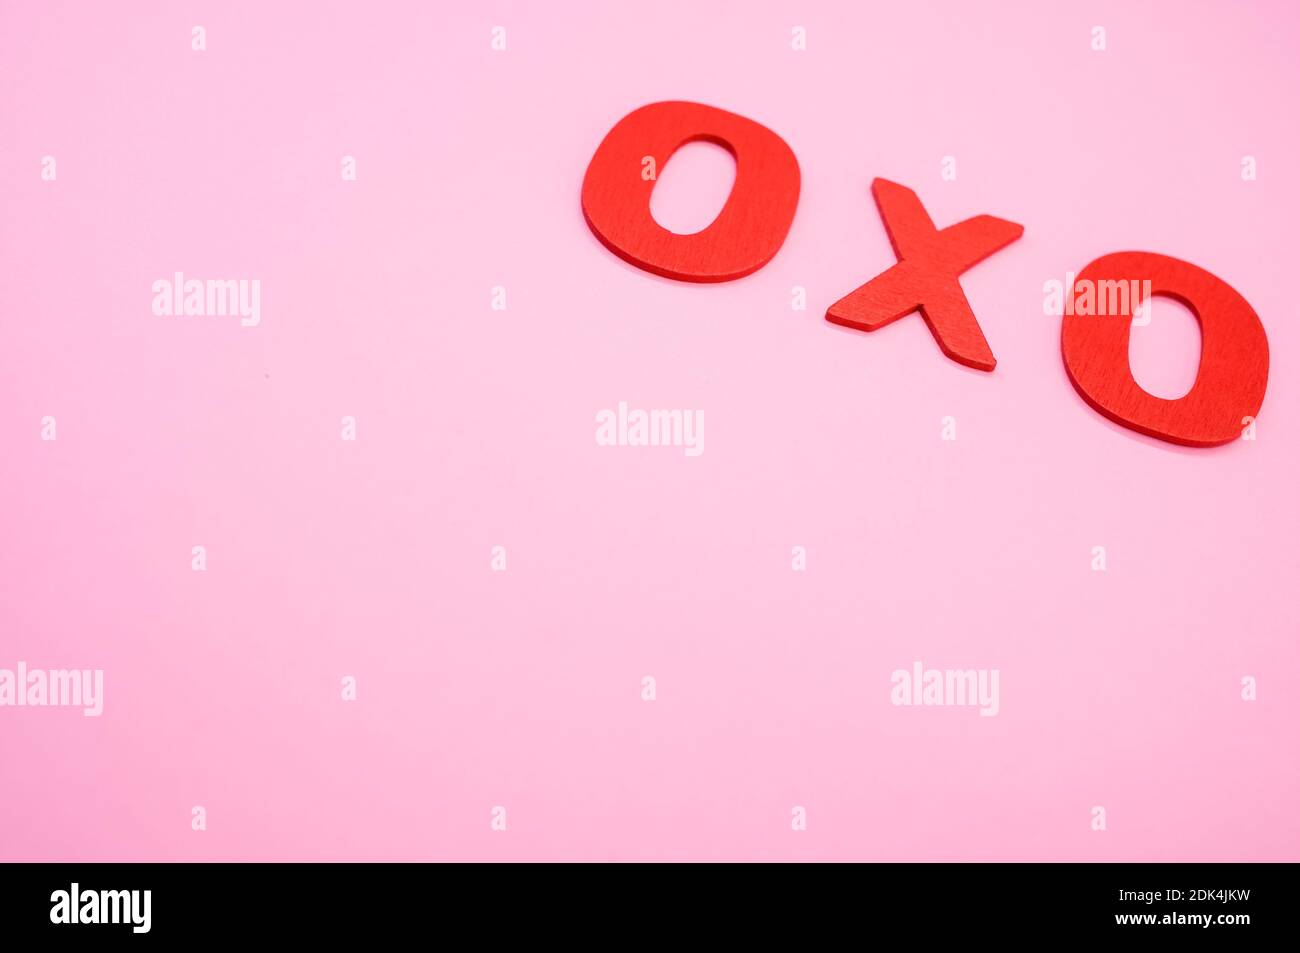 A top view of 0x0 written with wooden numbers on a pink surface Stock Photo